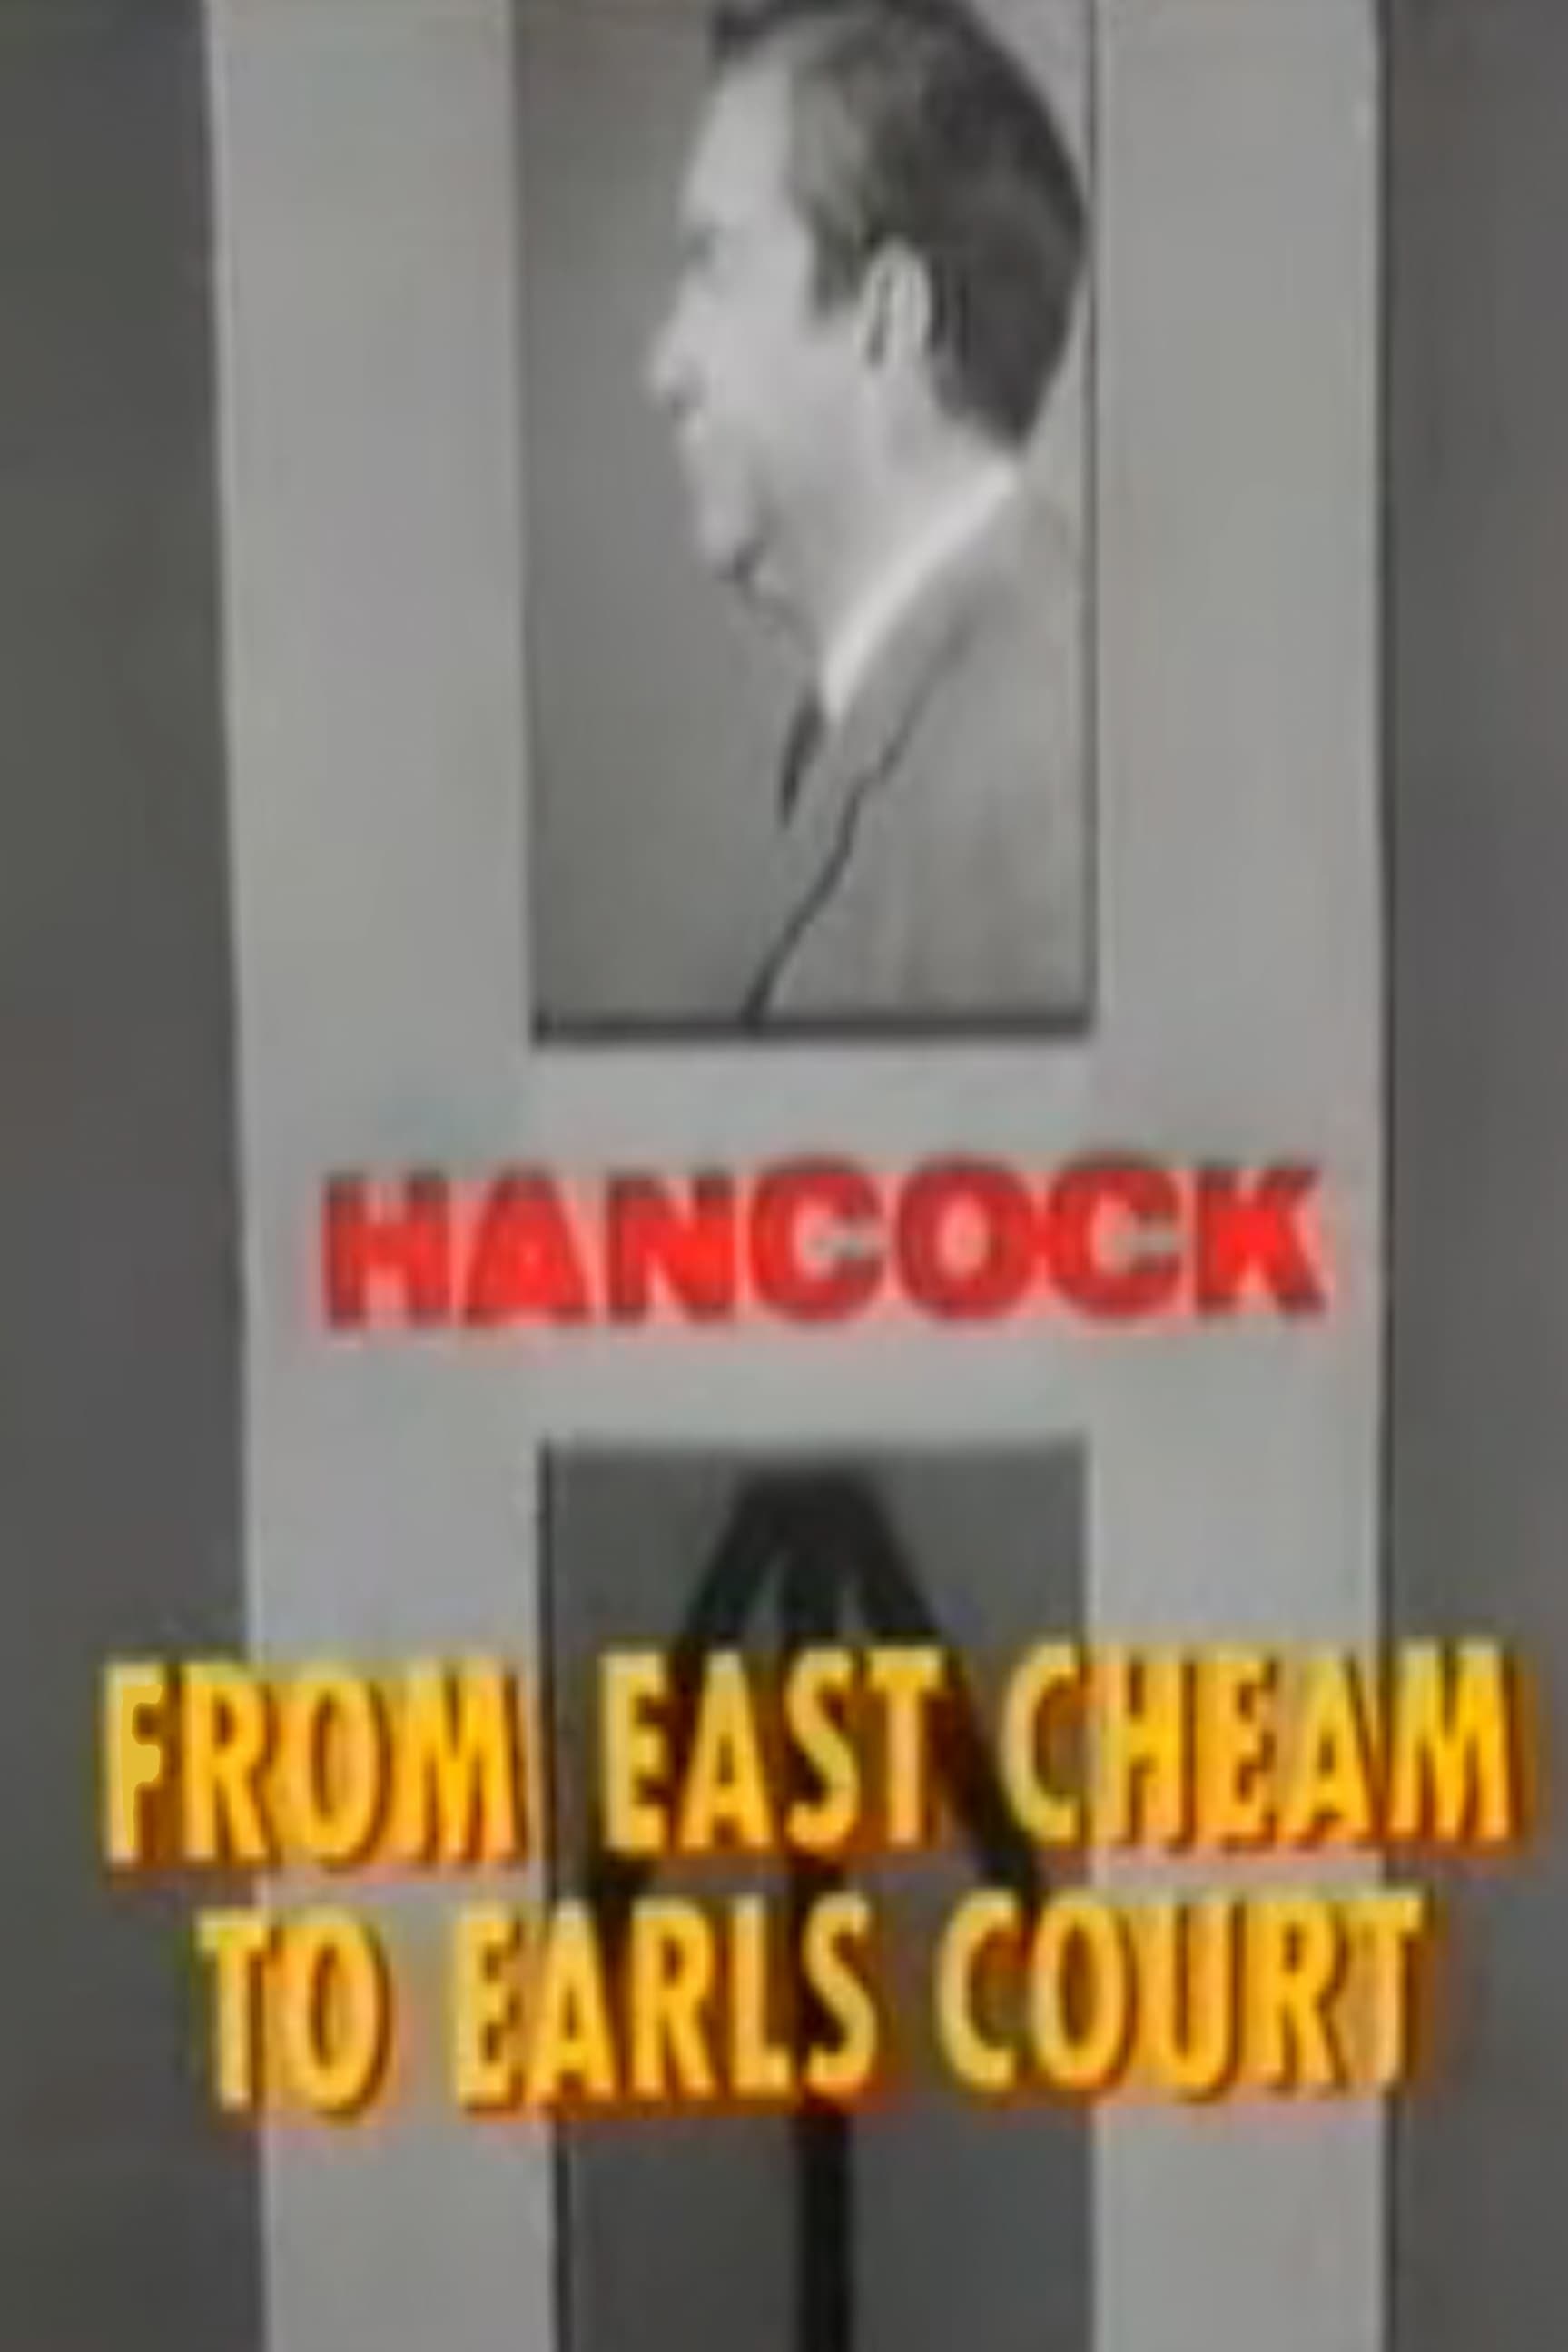 Tony Hancock: From East Cheam to Earls Court